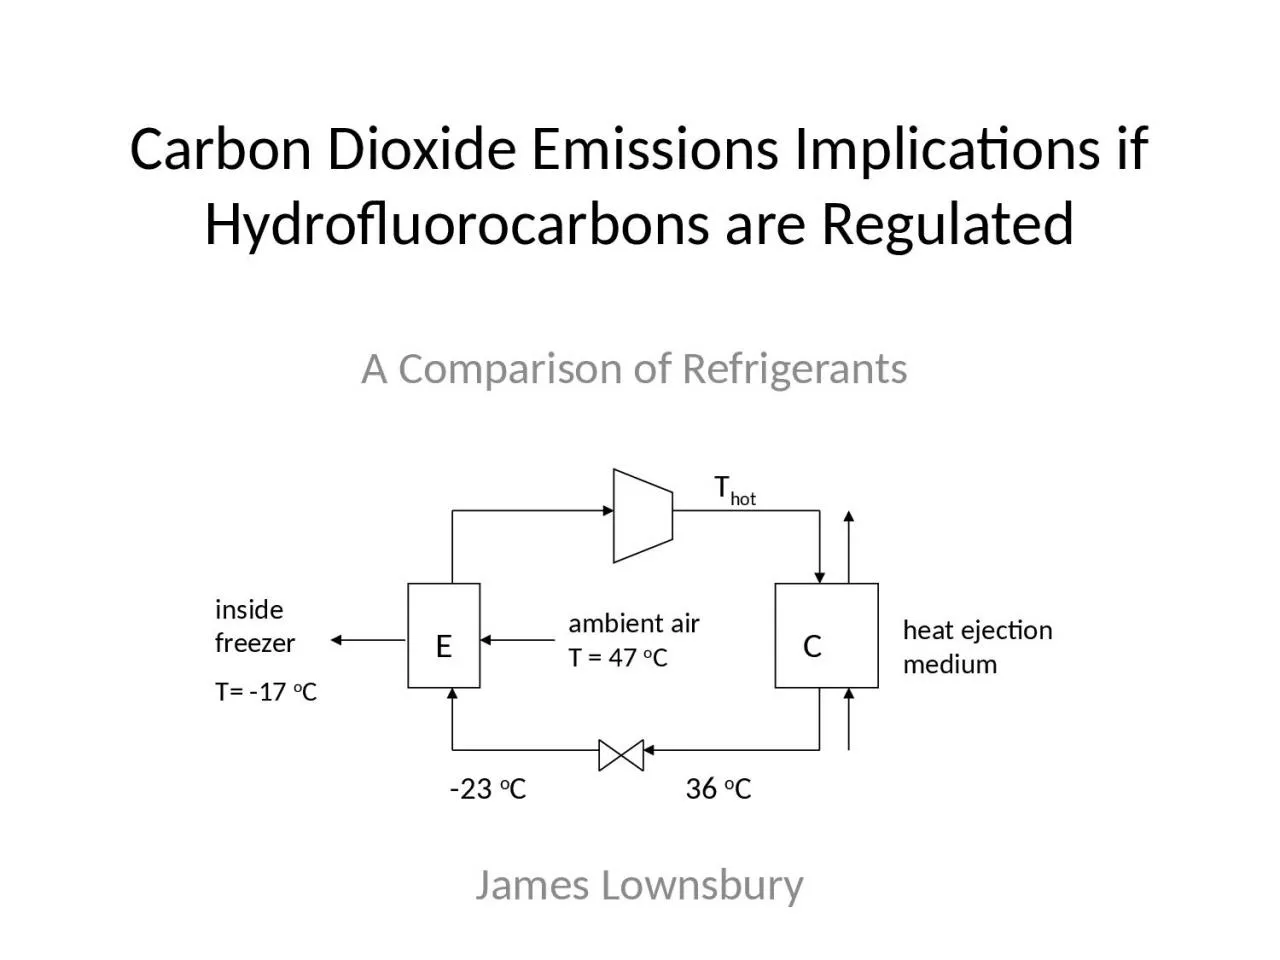 Carbon Dioxide Emissions Implications if